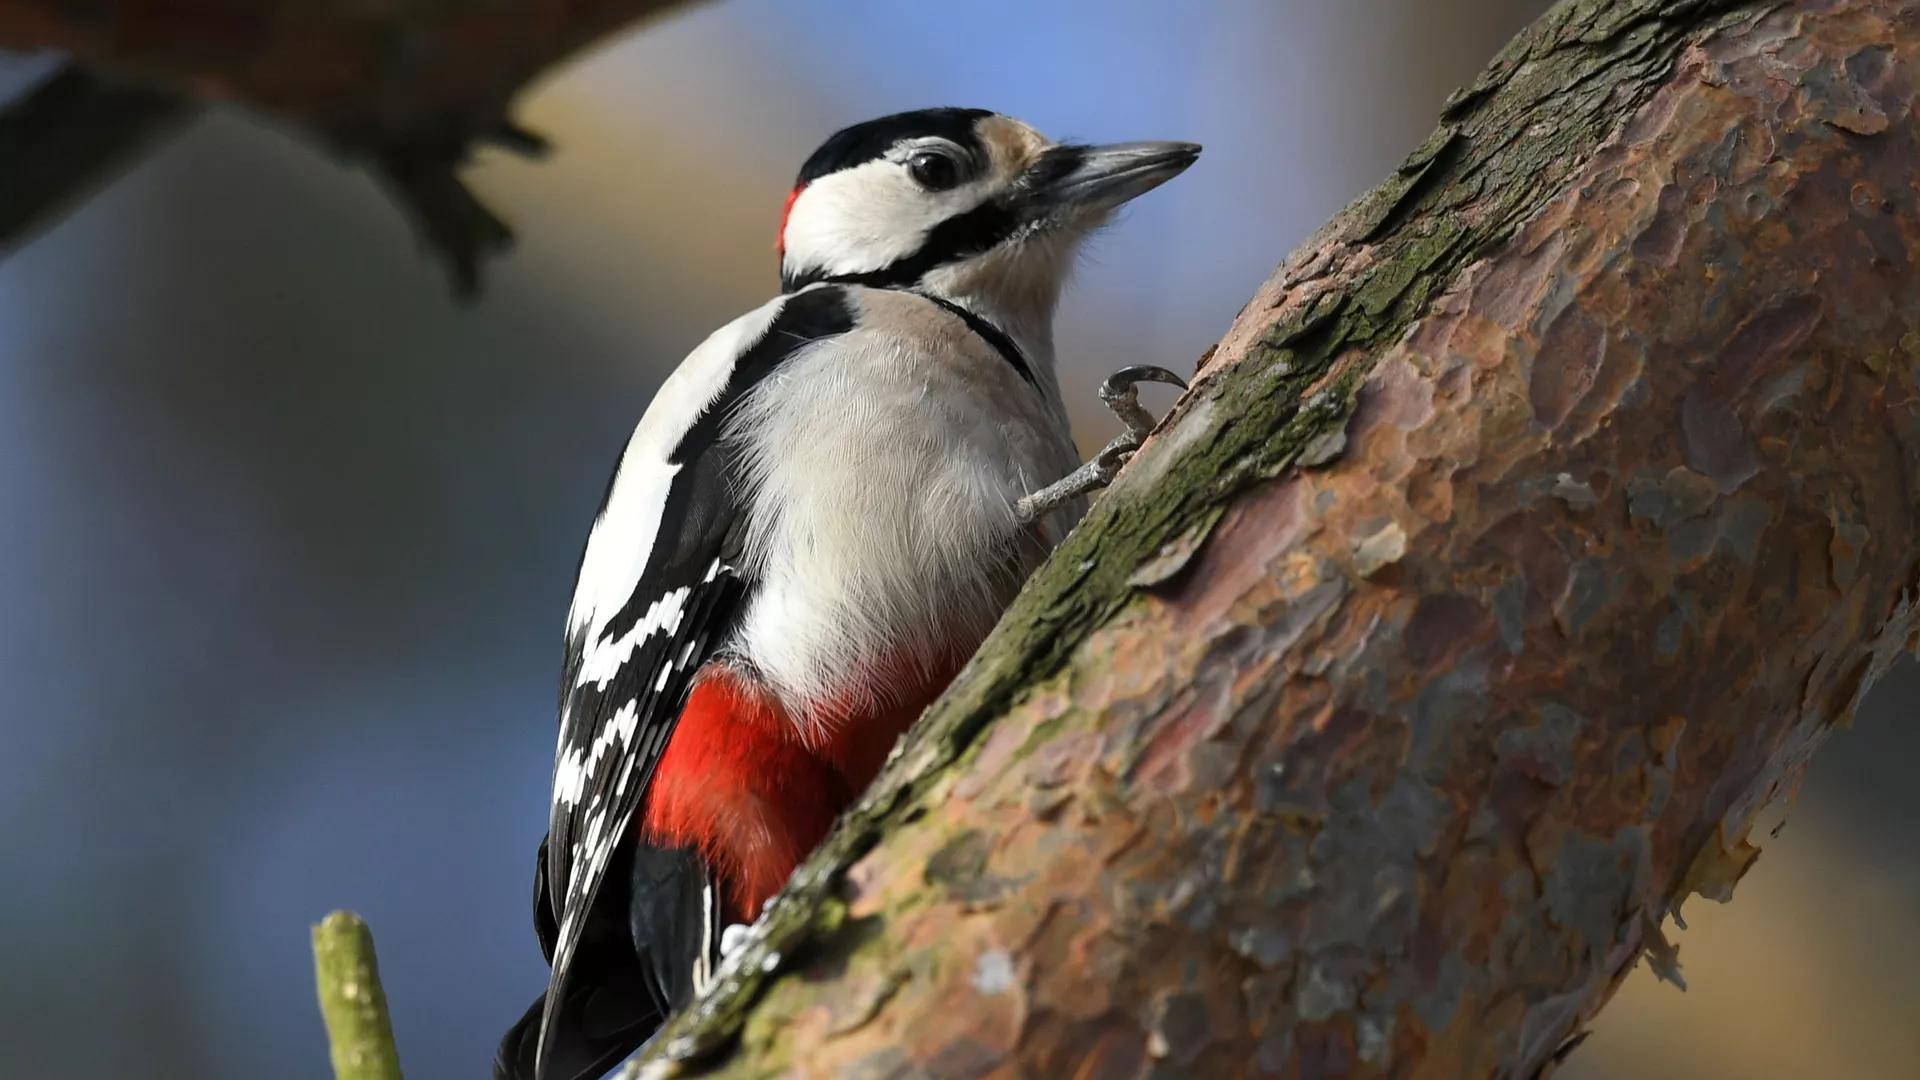 Woodpeckers Have Brain Areas Controlling Their Ability to Drum, Study Says